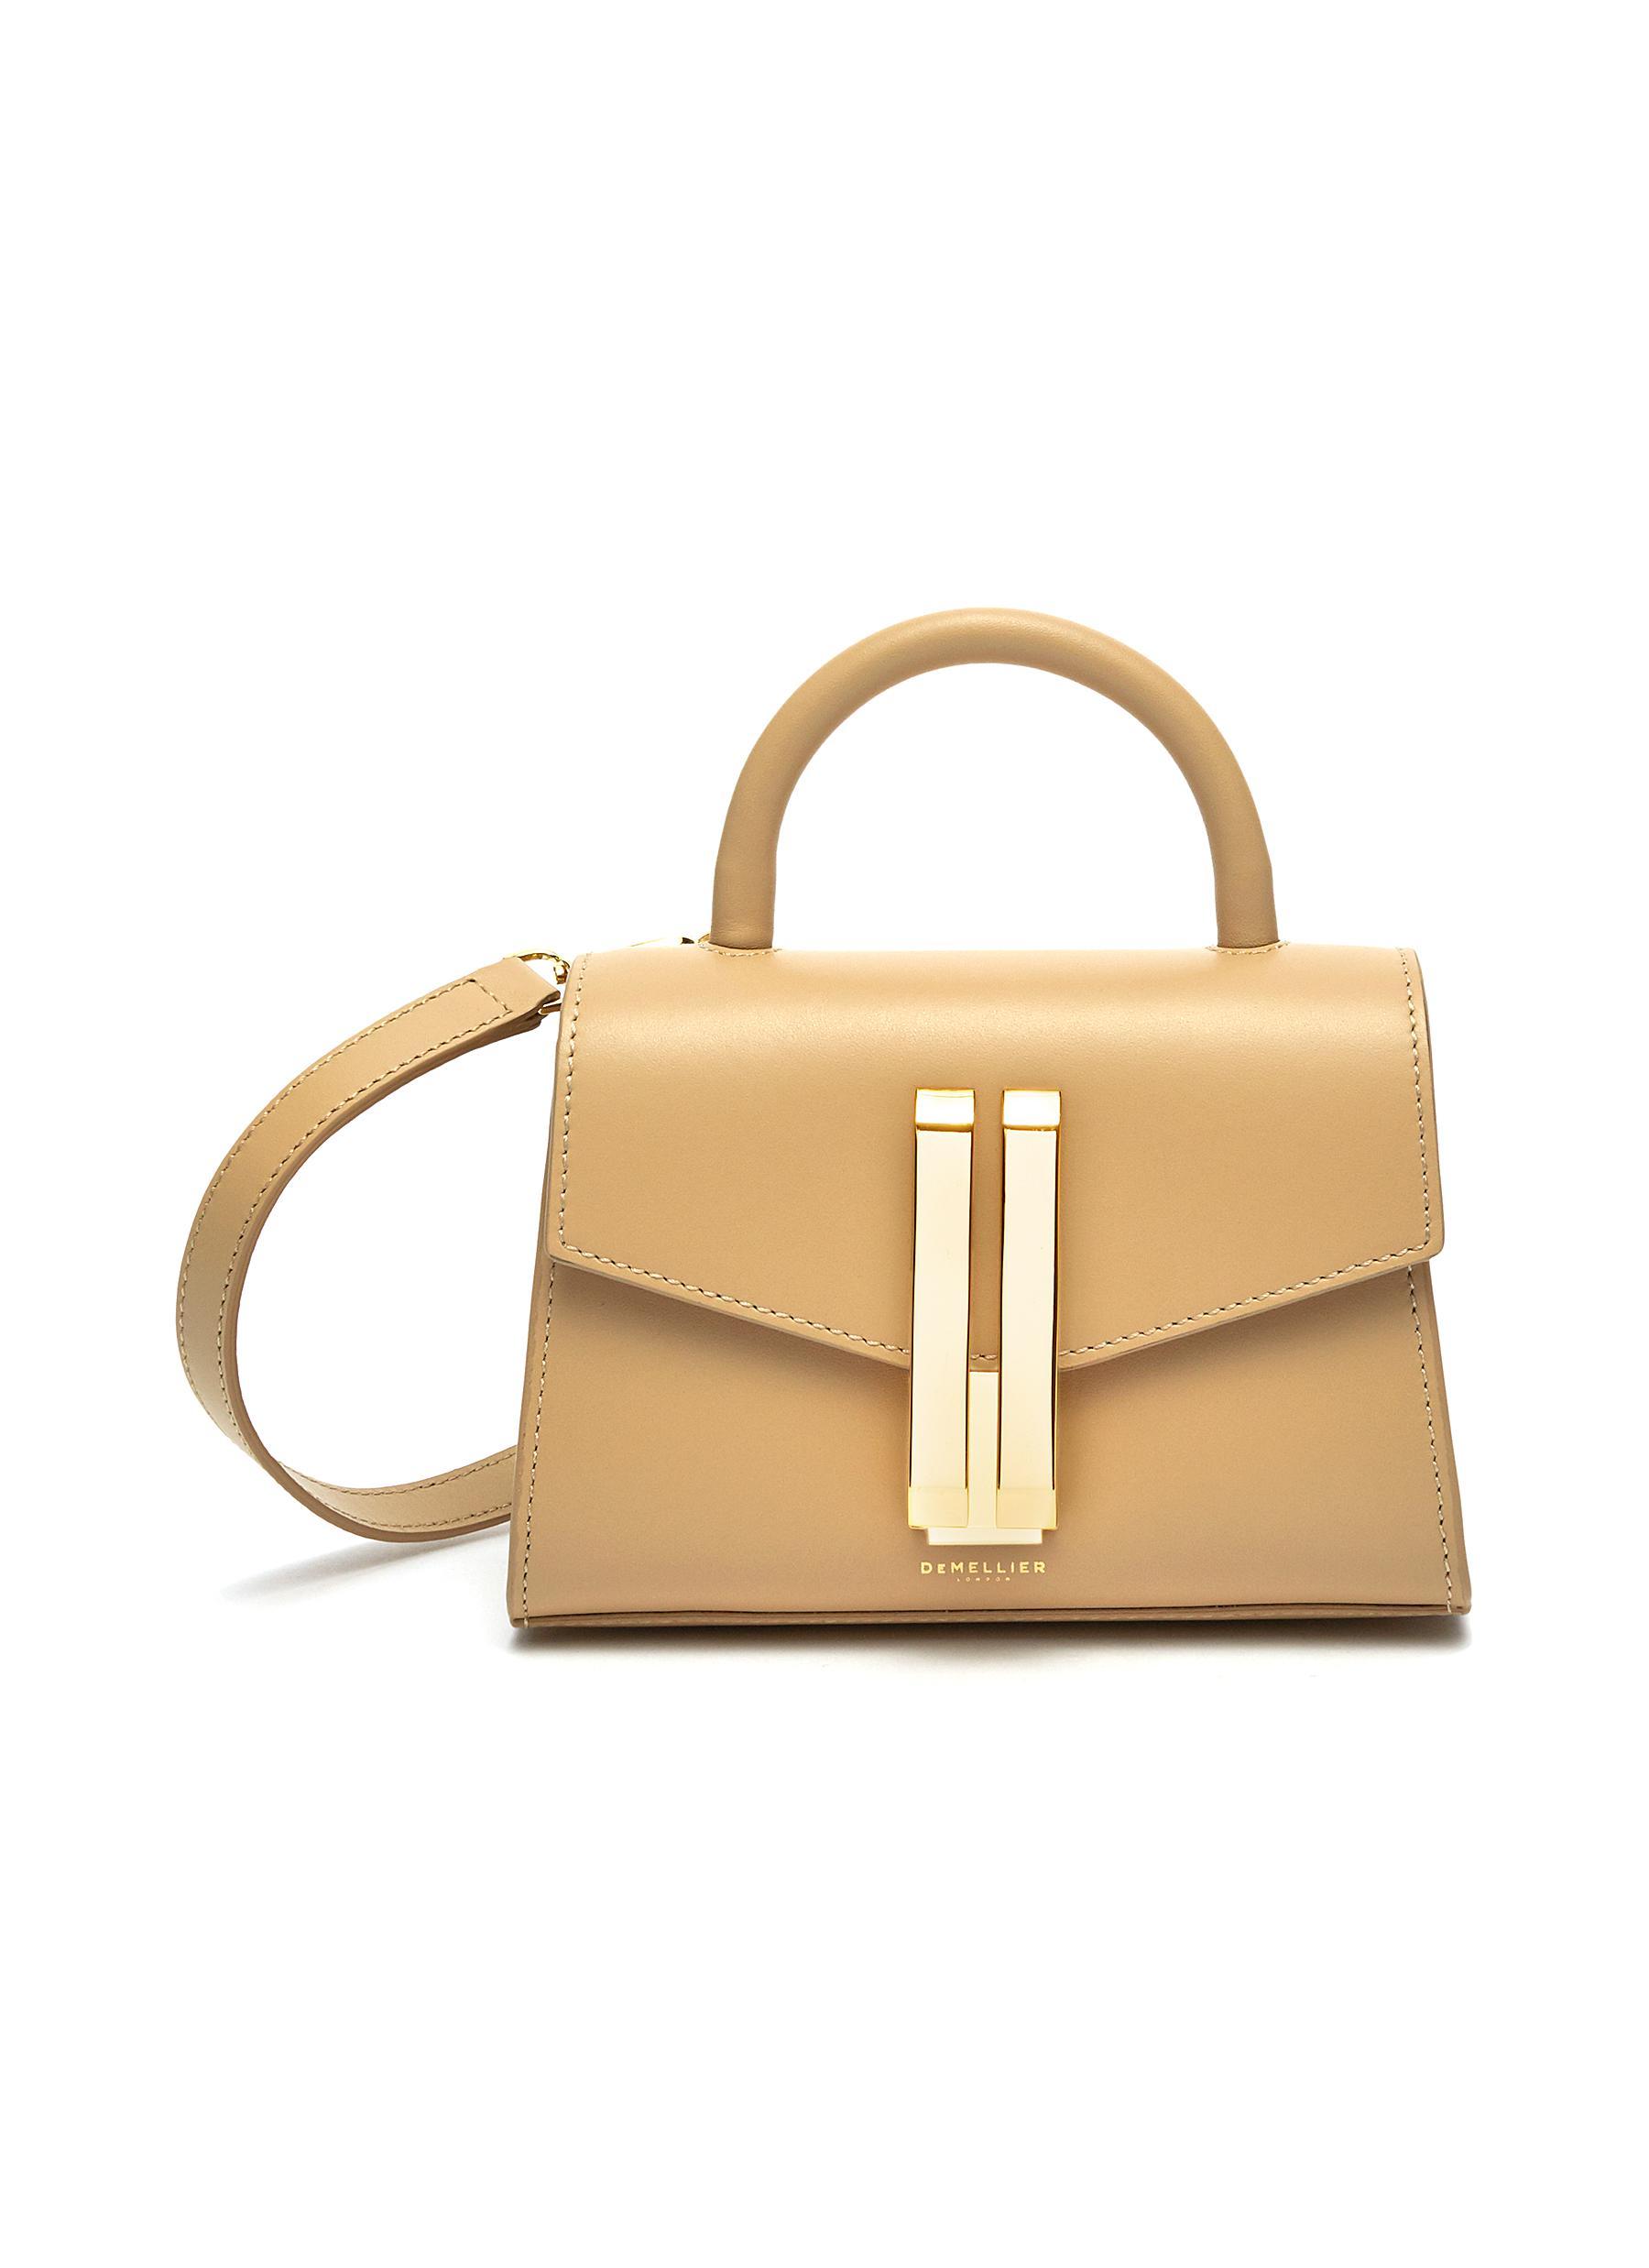 DeMellier 'nano Montreal' Top Handle Leather Bag - Lyst